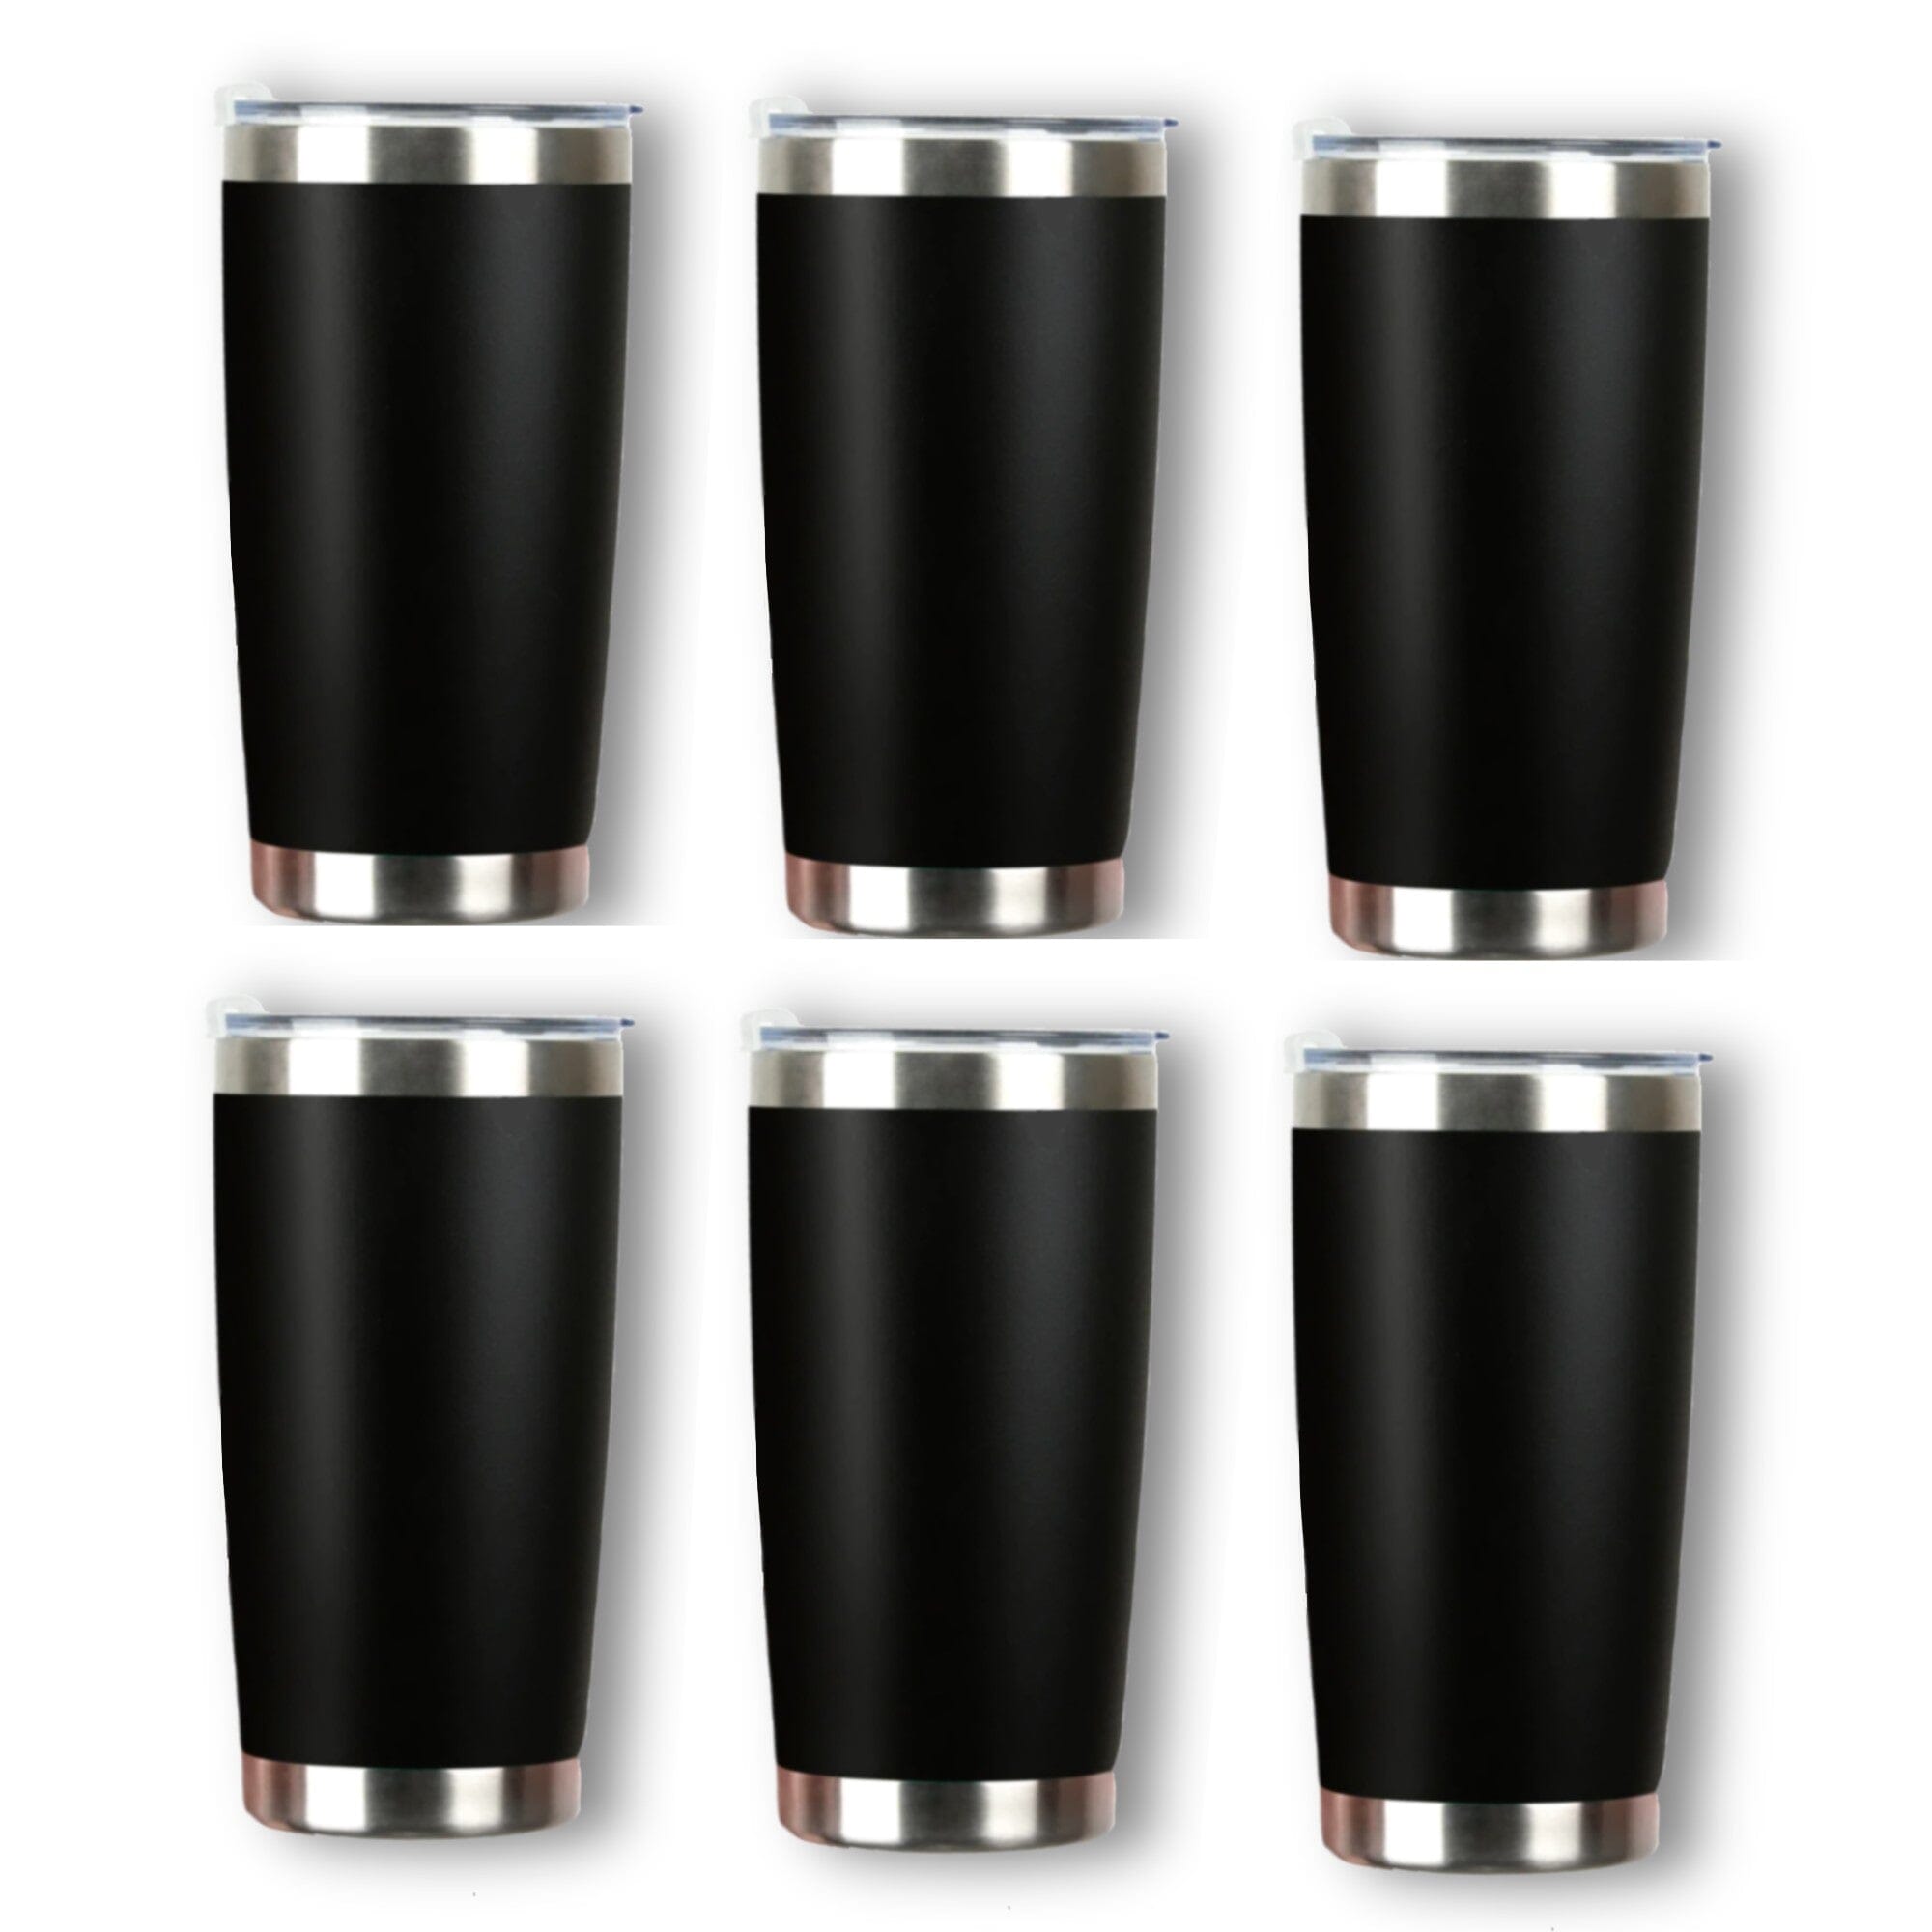 Looking For Coffee – Engraved Stainless Steel Coffee Tumbler